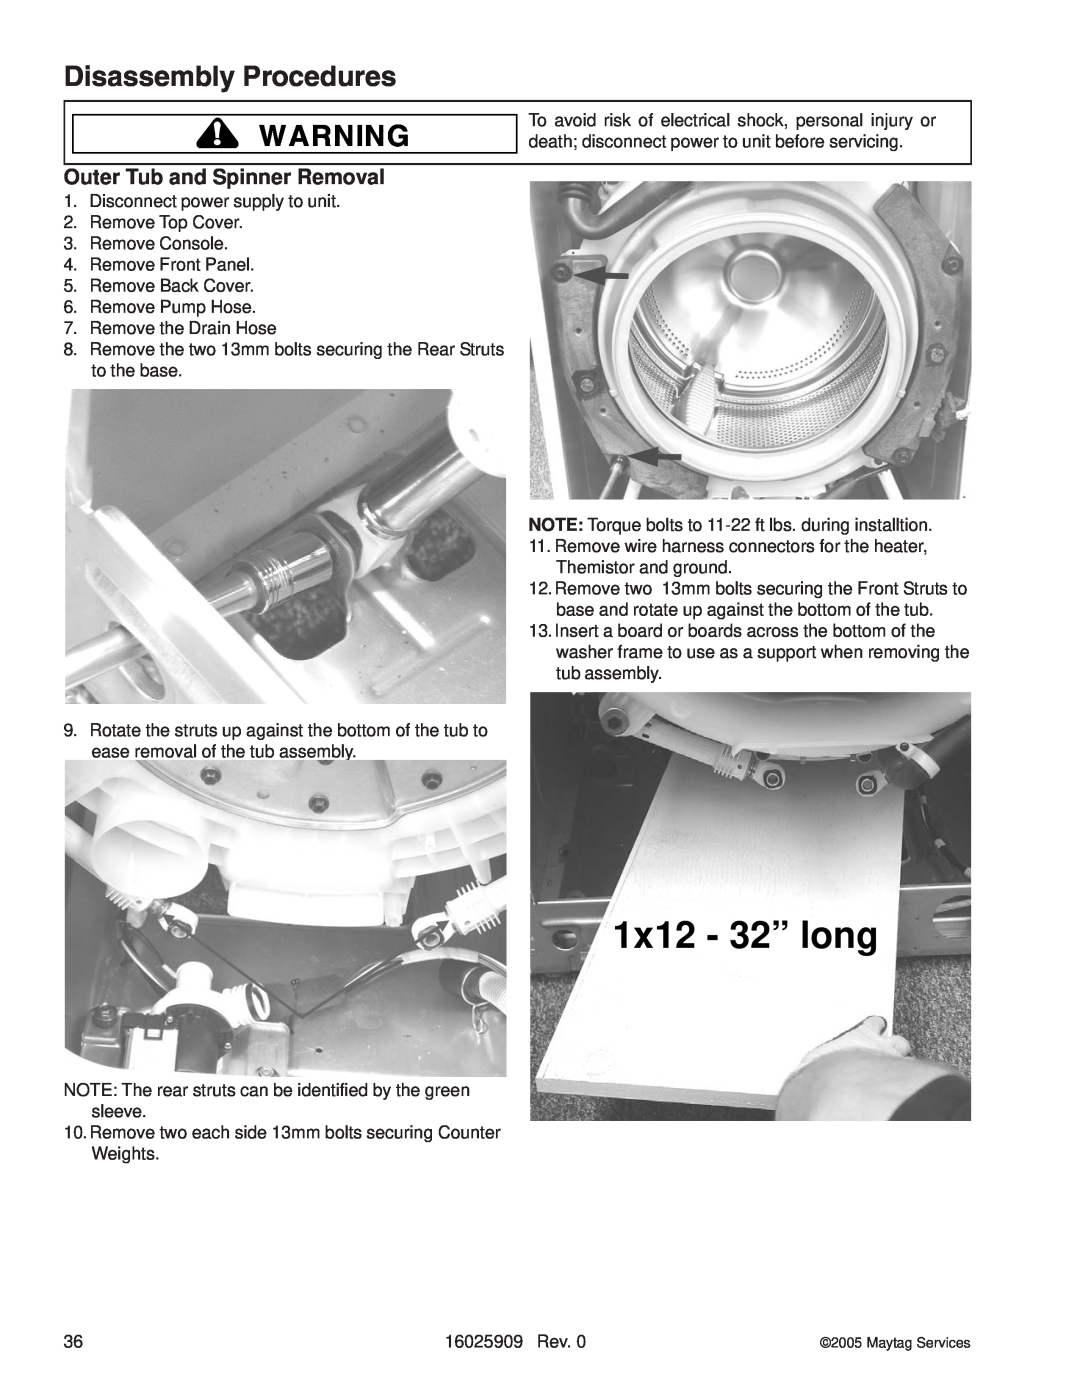 Whirlpool MAH9700AW manual Outer Tub and Spinner Removal, 1x12 - 32” long, Disassembly Procedures 